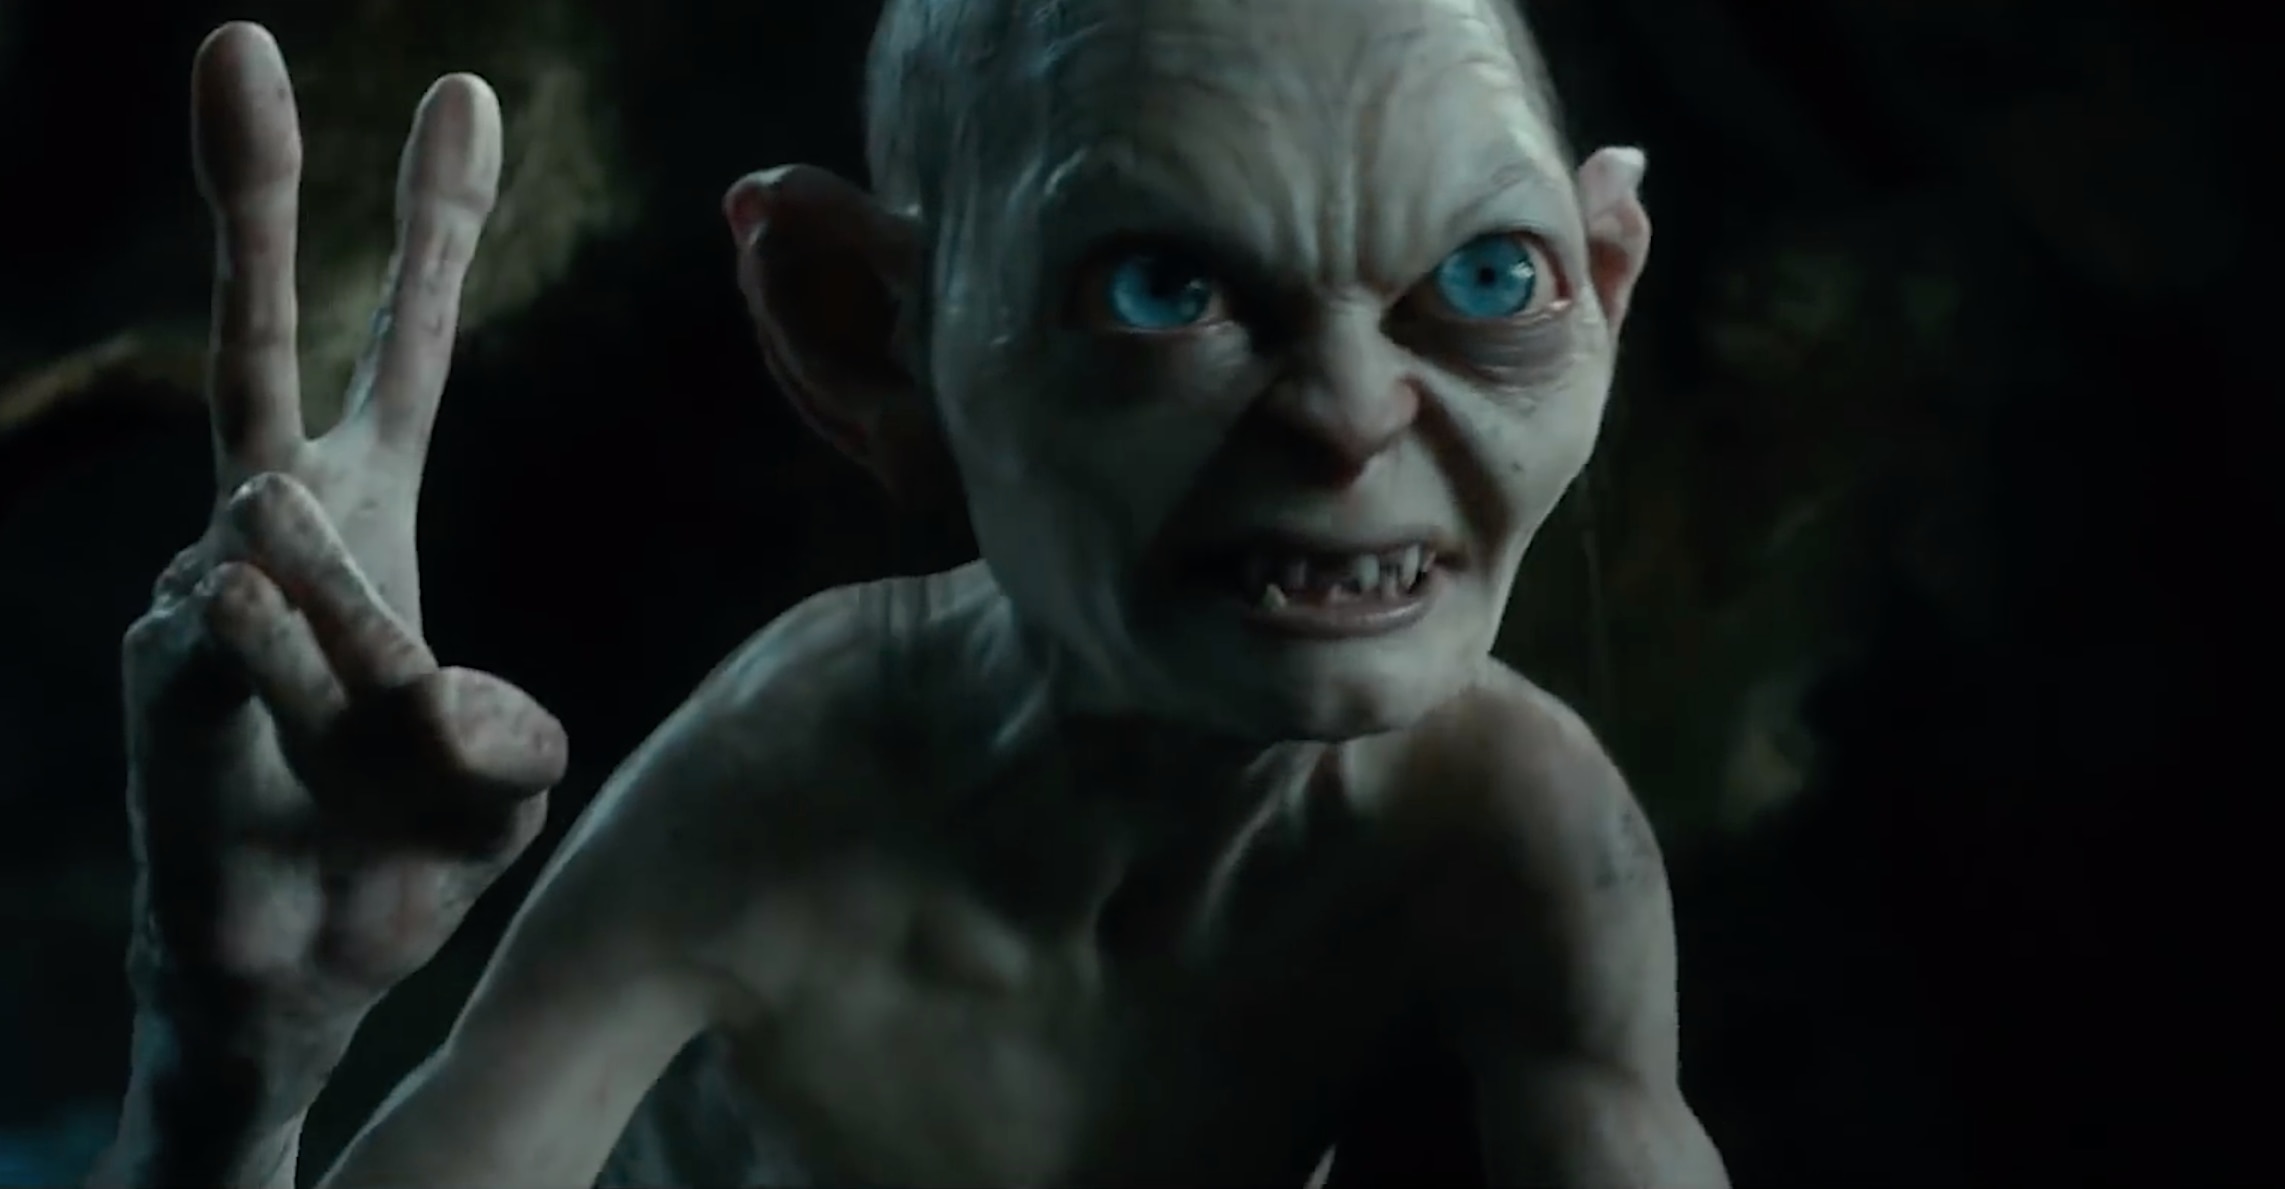 The Lord of the Rings: Gollum video game trailer drops first look